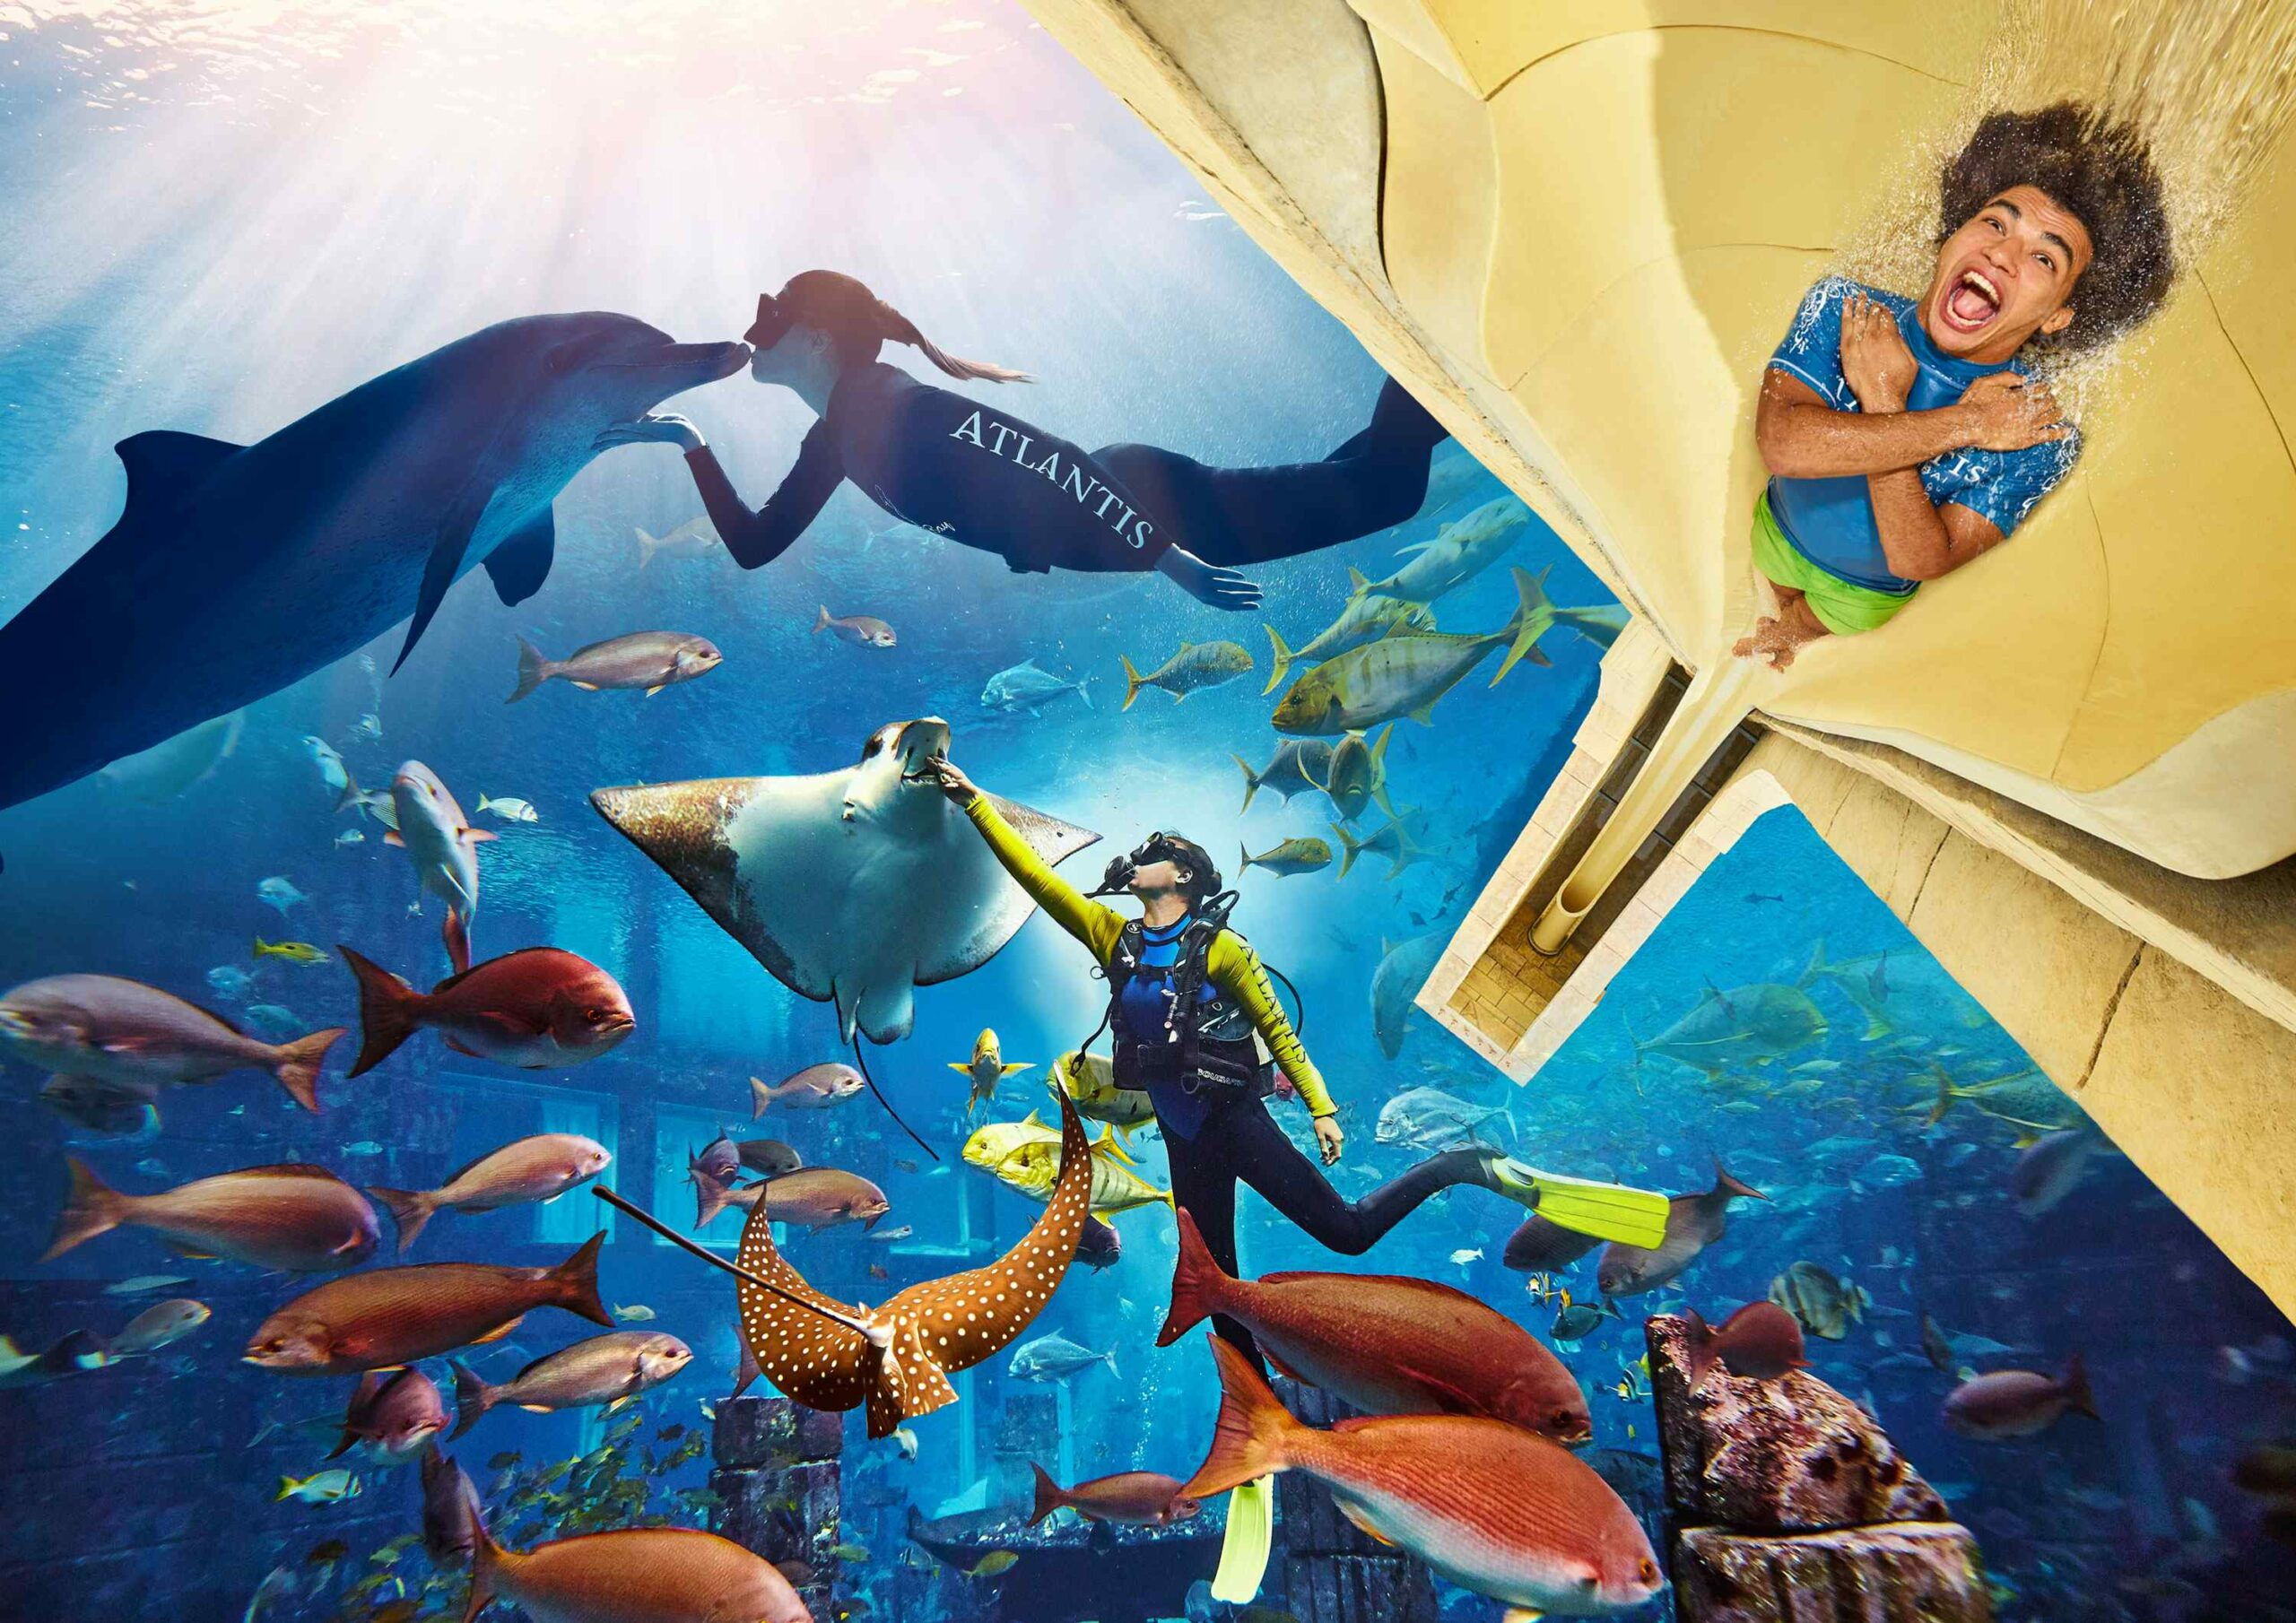 The Lost Chambers Aquarium dives into an oceanic adventure at Dolphin Bay in Atlas Village, where the water realm reigns supreme.